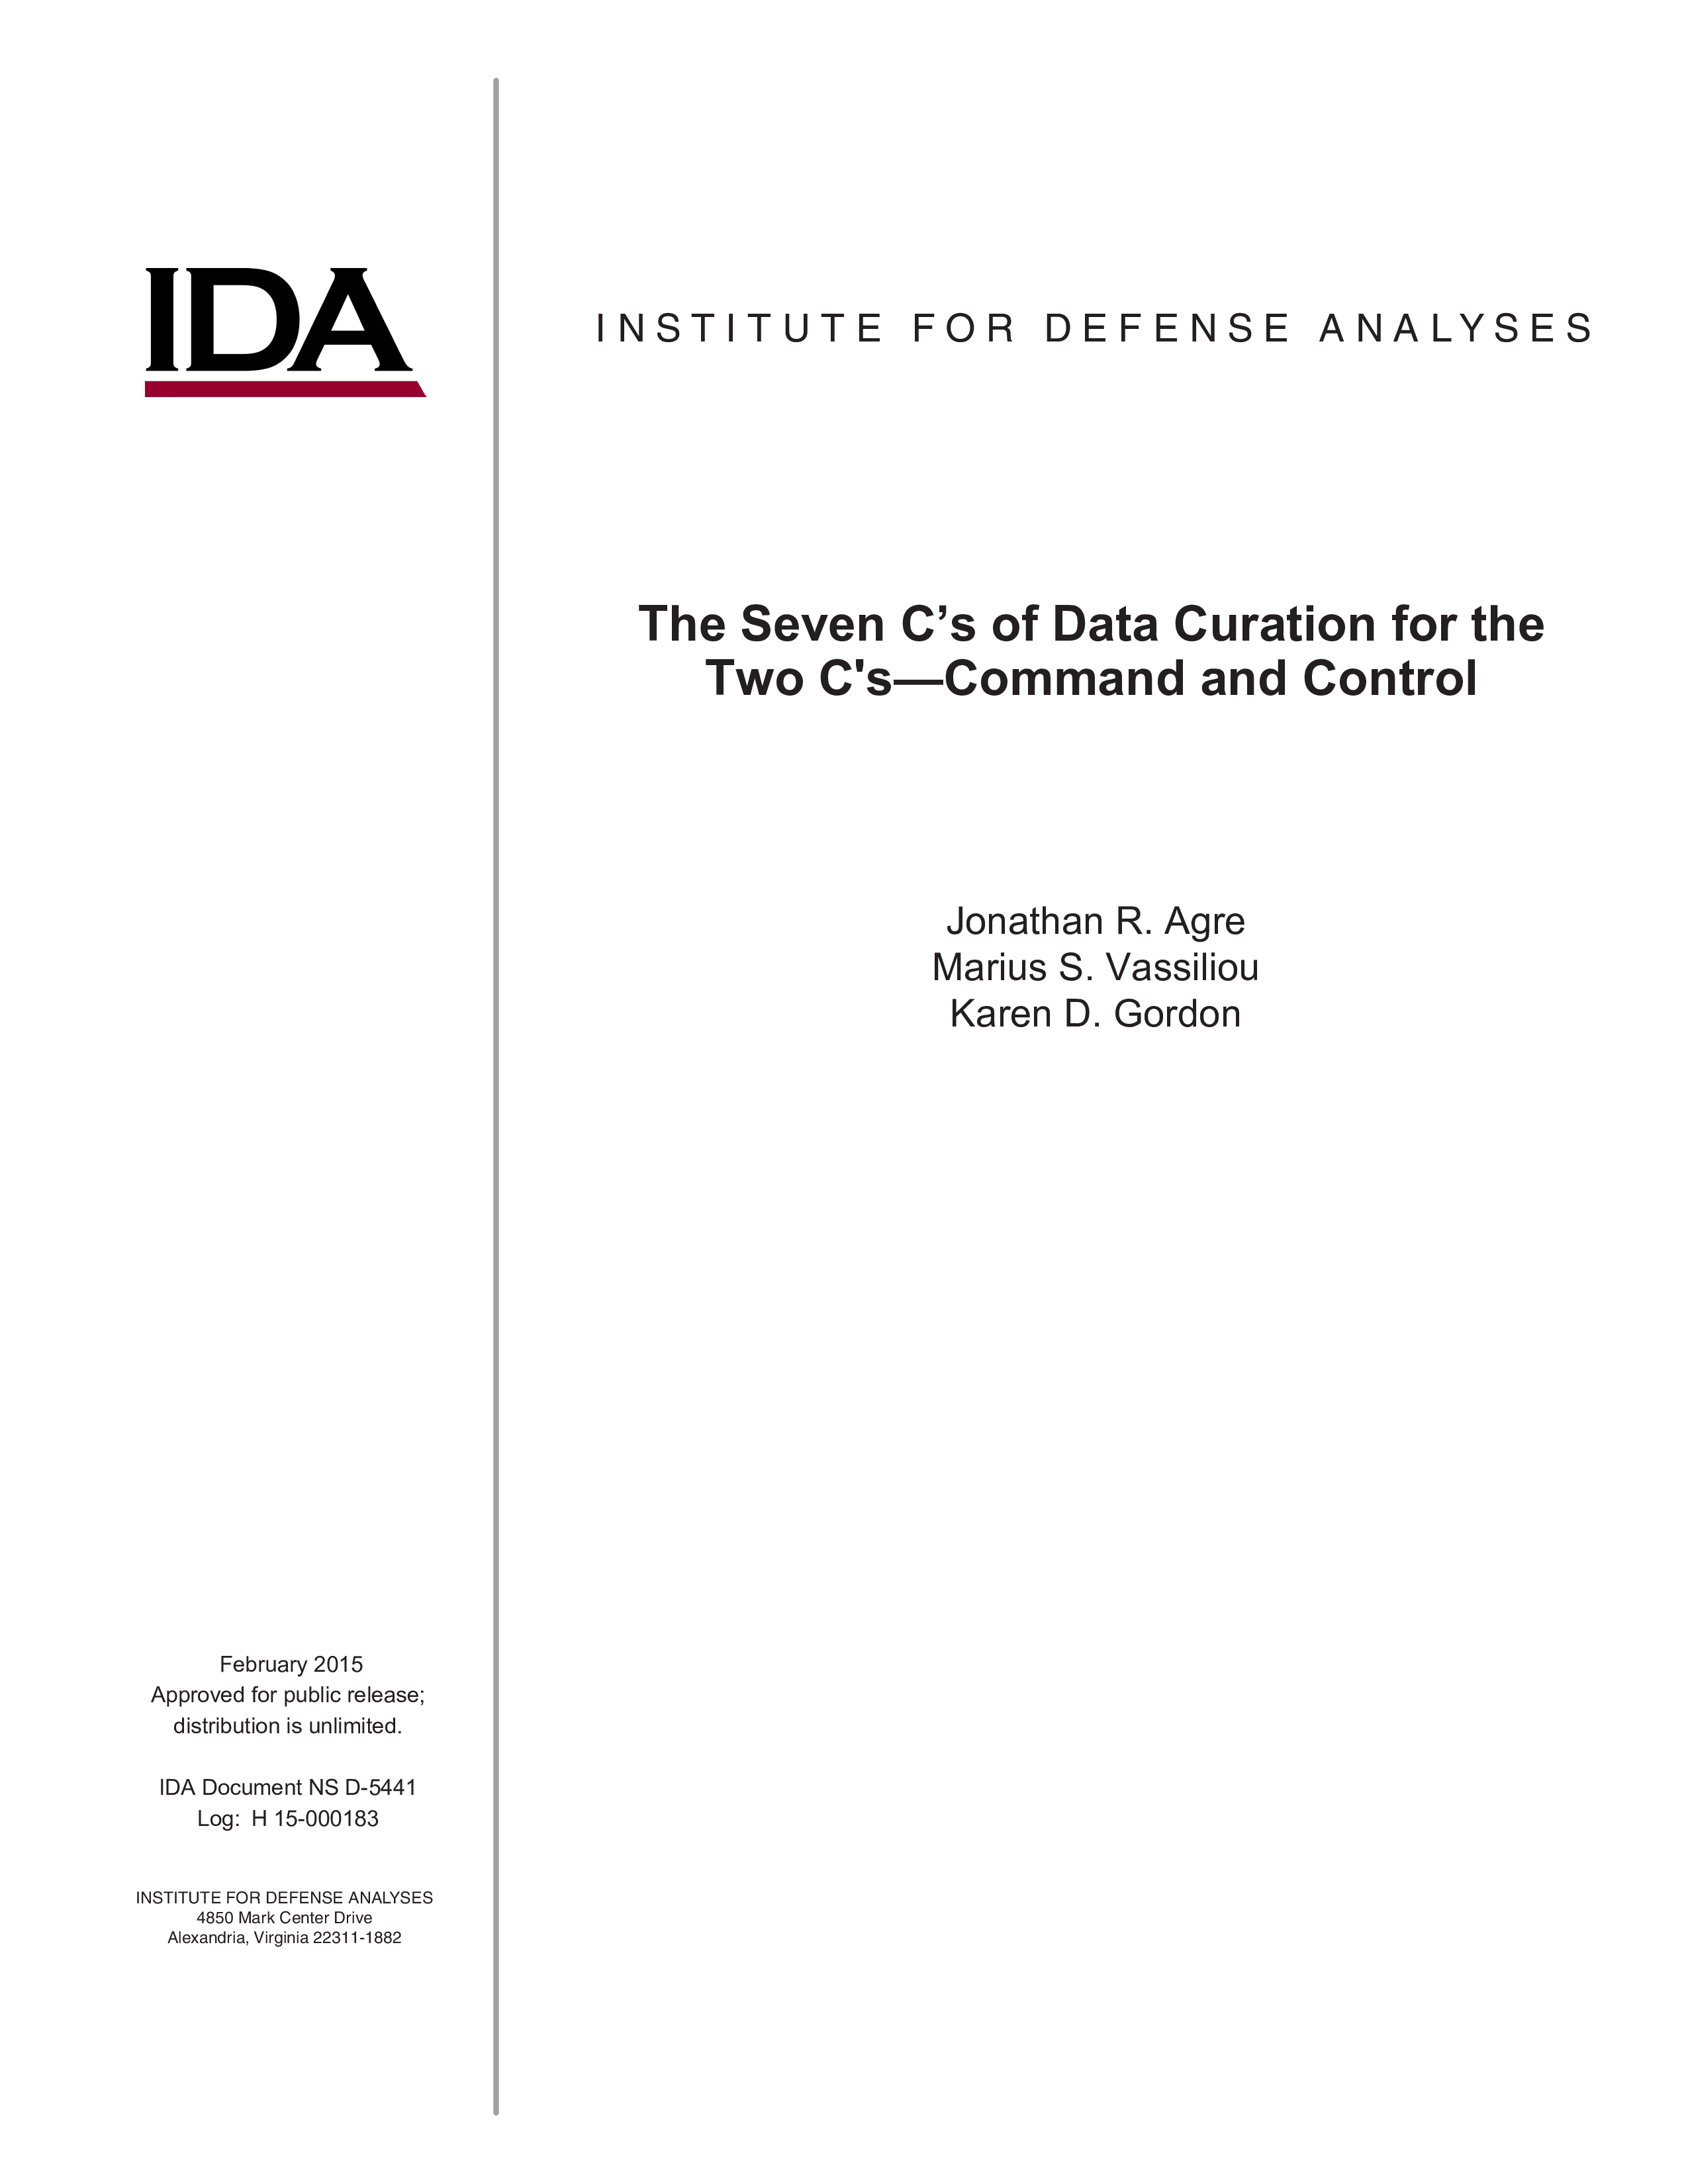 The Seven C’s of Data Curation for the Two C